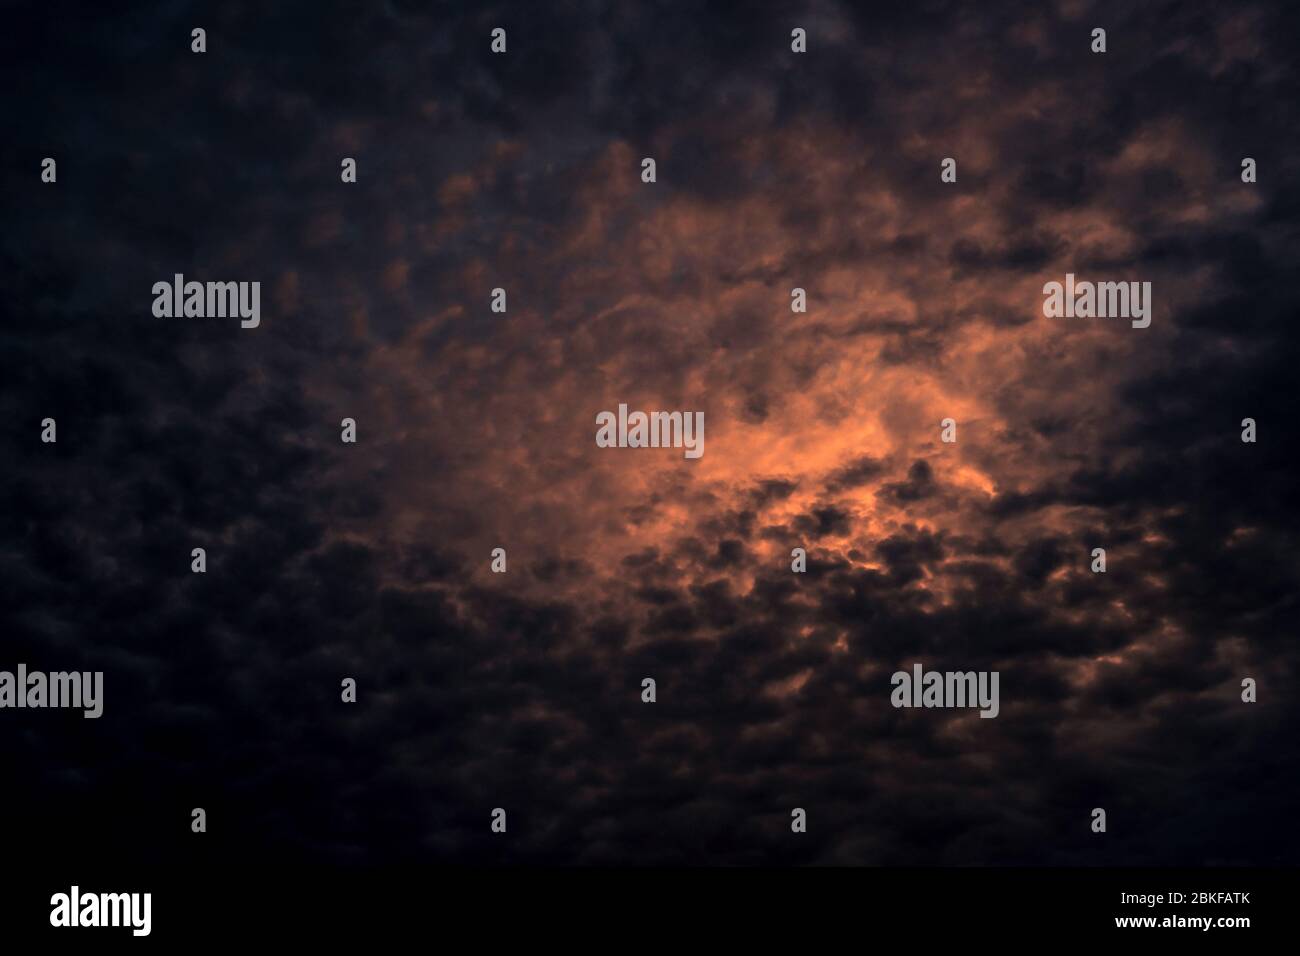 Red light of sun in dark cloudy sunset sky. Dramatic sky with beautiful pattern of fluffy clouds. Mental power or psychic power background. Power Stock Photo